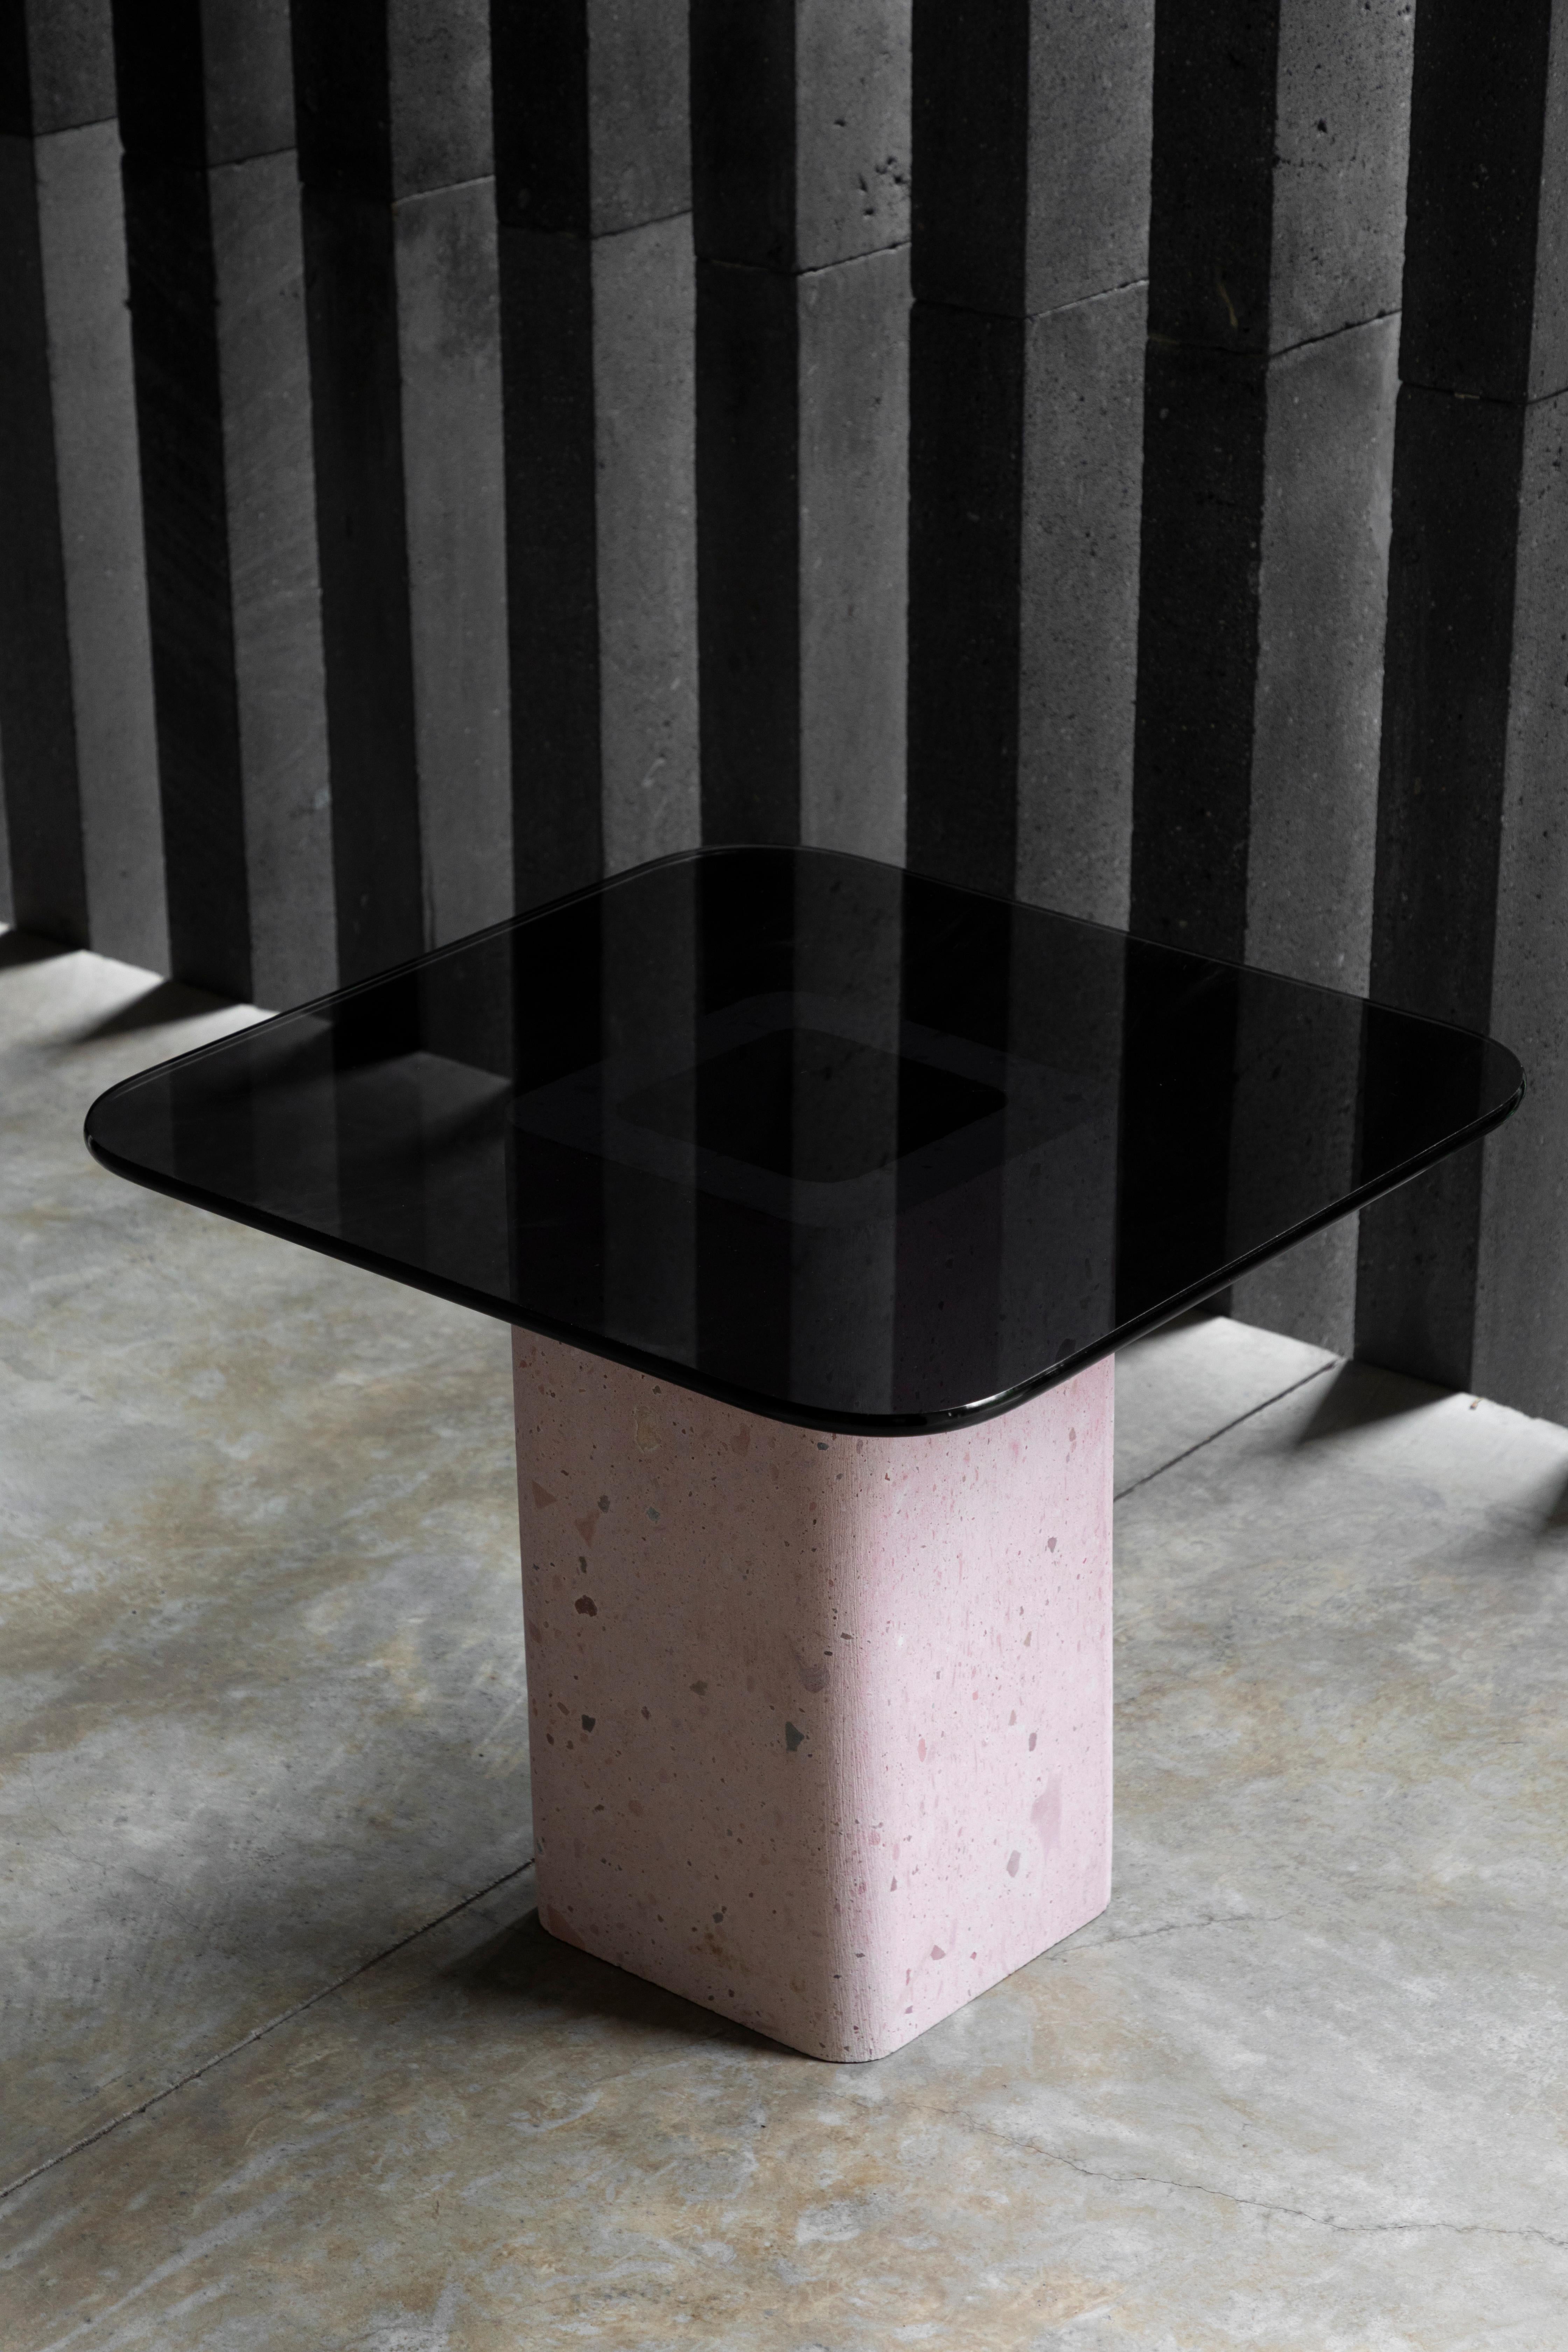 Materia side table by Brera Studio.
Limited Edition of 20 pieces.
Dimensions: Base: D 25 x W 25 x H 45 cm. Glass base: W 50 x L 50 cm.
Materials: Pink stone base and smoke-colored glass base.

Materia Table, made of pink stone, as its name